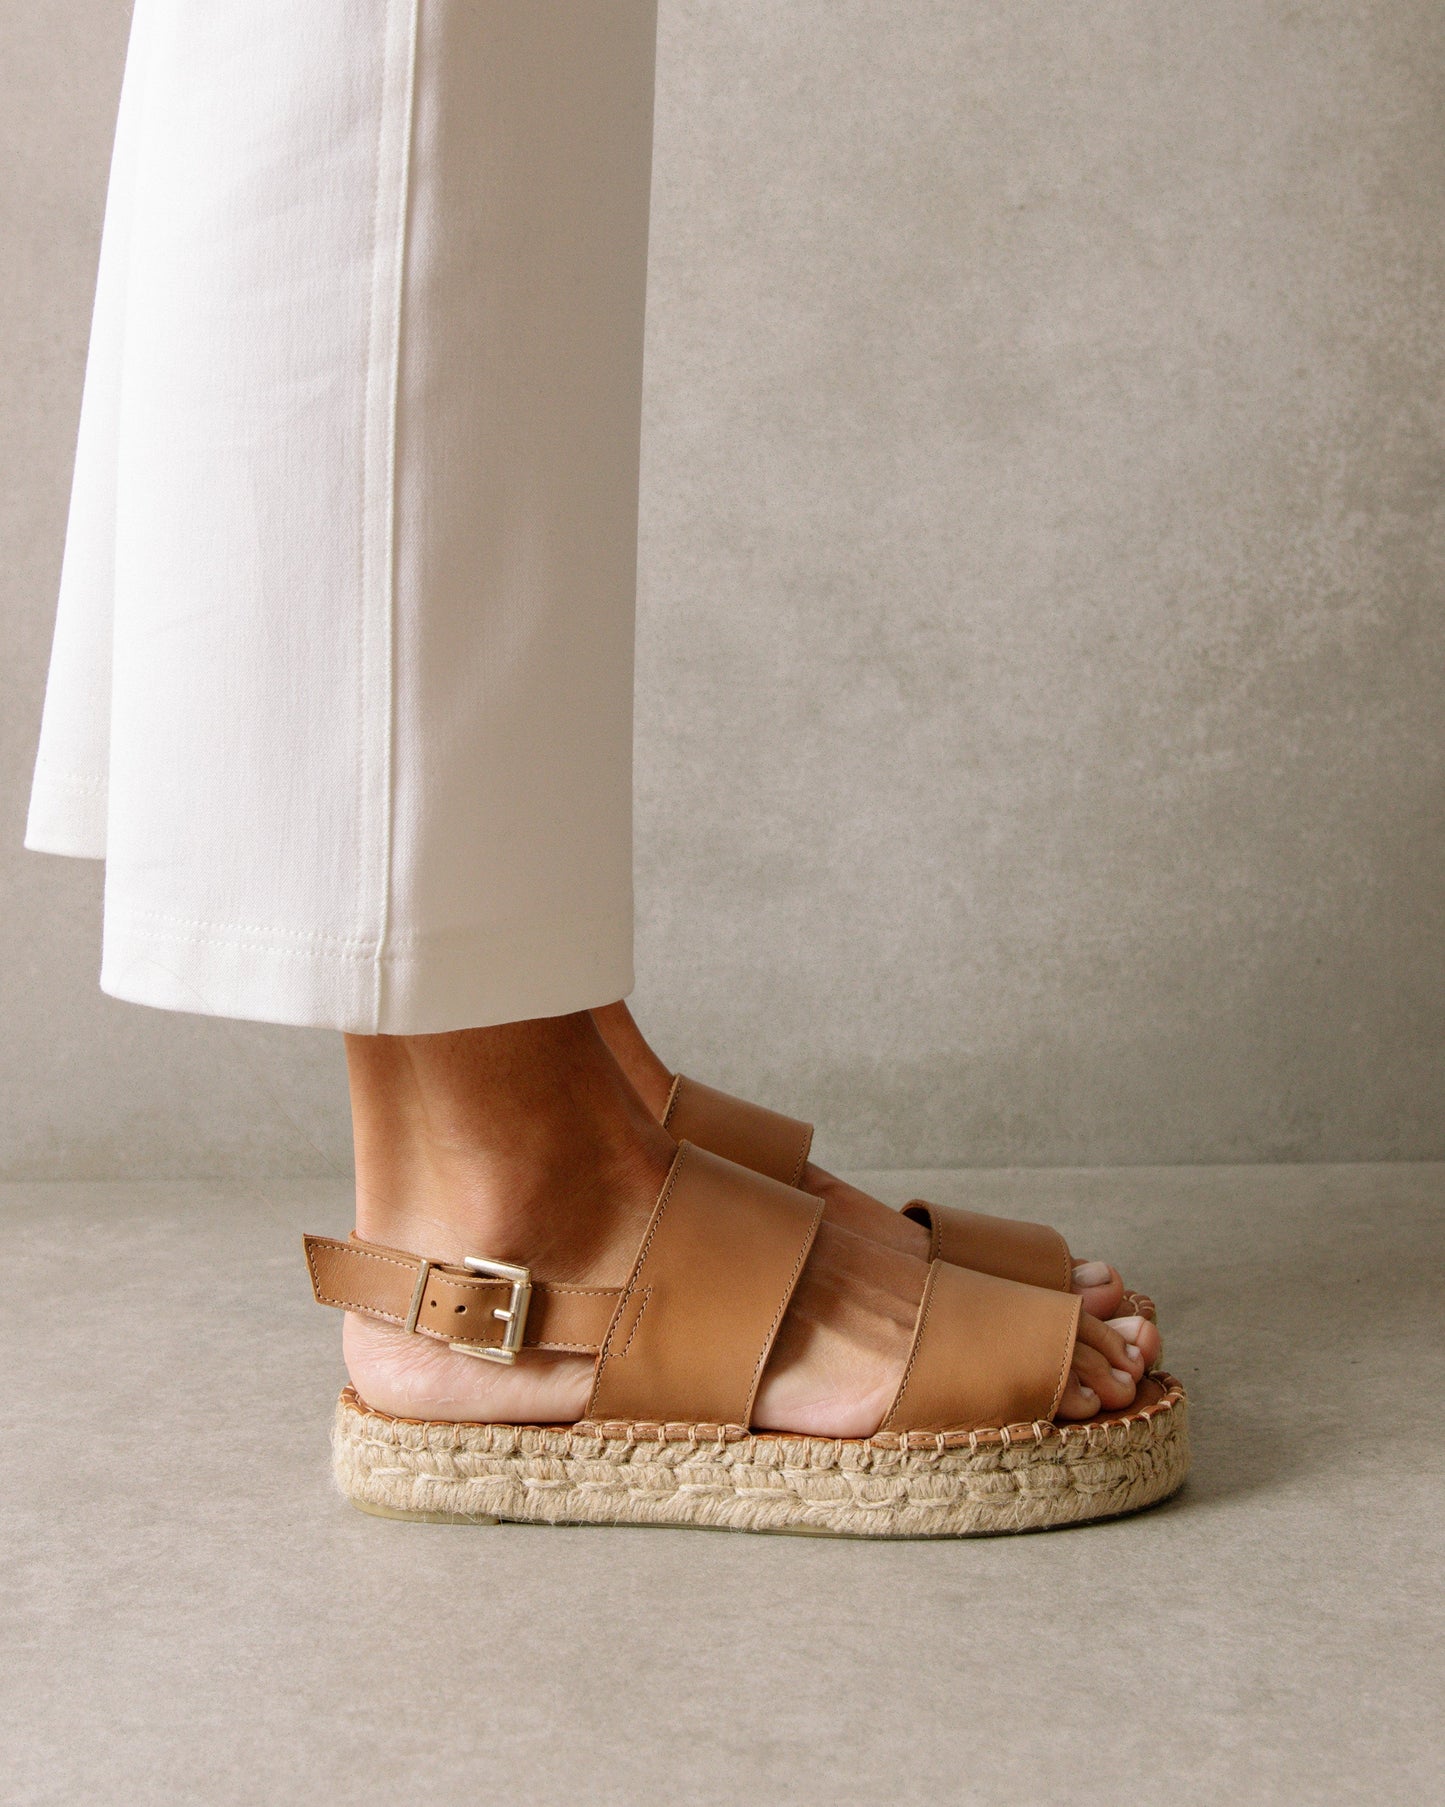 These double strap platform sandals boast two straight, wide straps with an ankle strap with buckle to adjust your desired fit. They also have an open toe so you can let your feet breathe in the summer heat. Sustainably made in Spain.